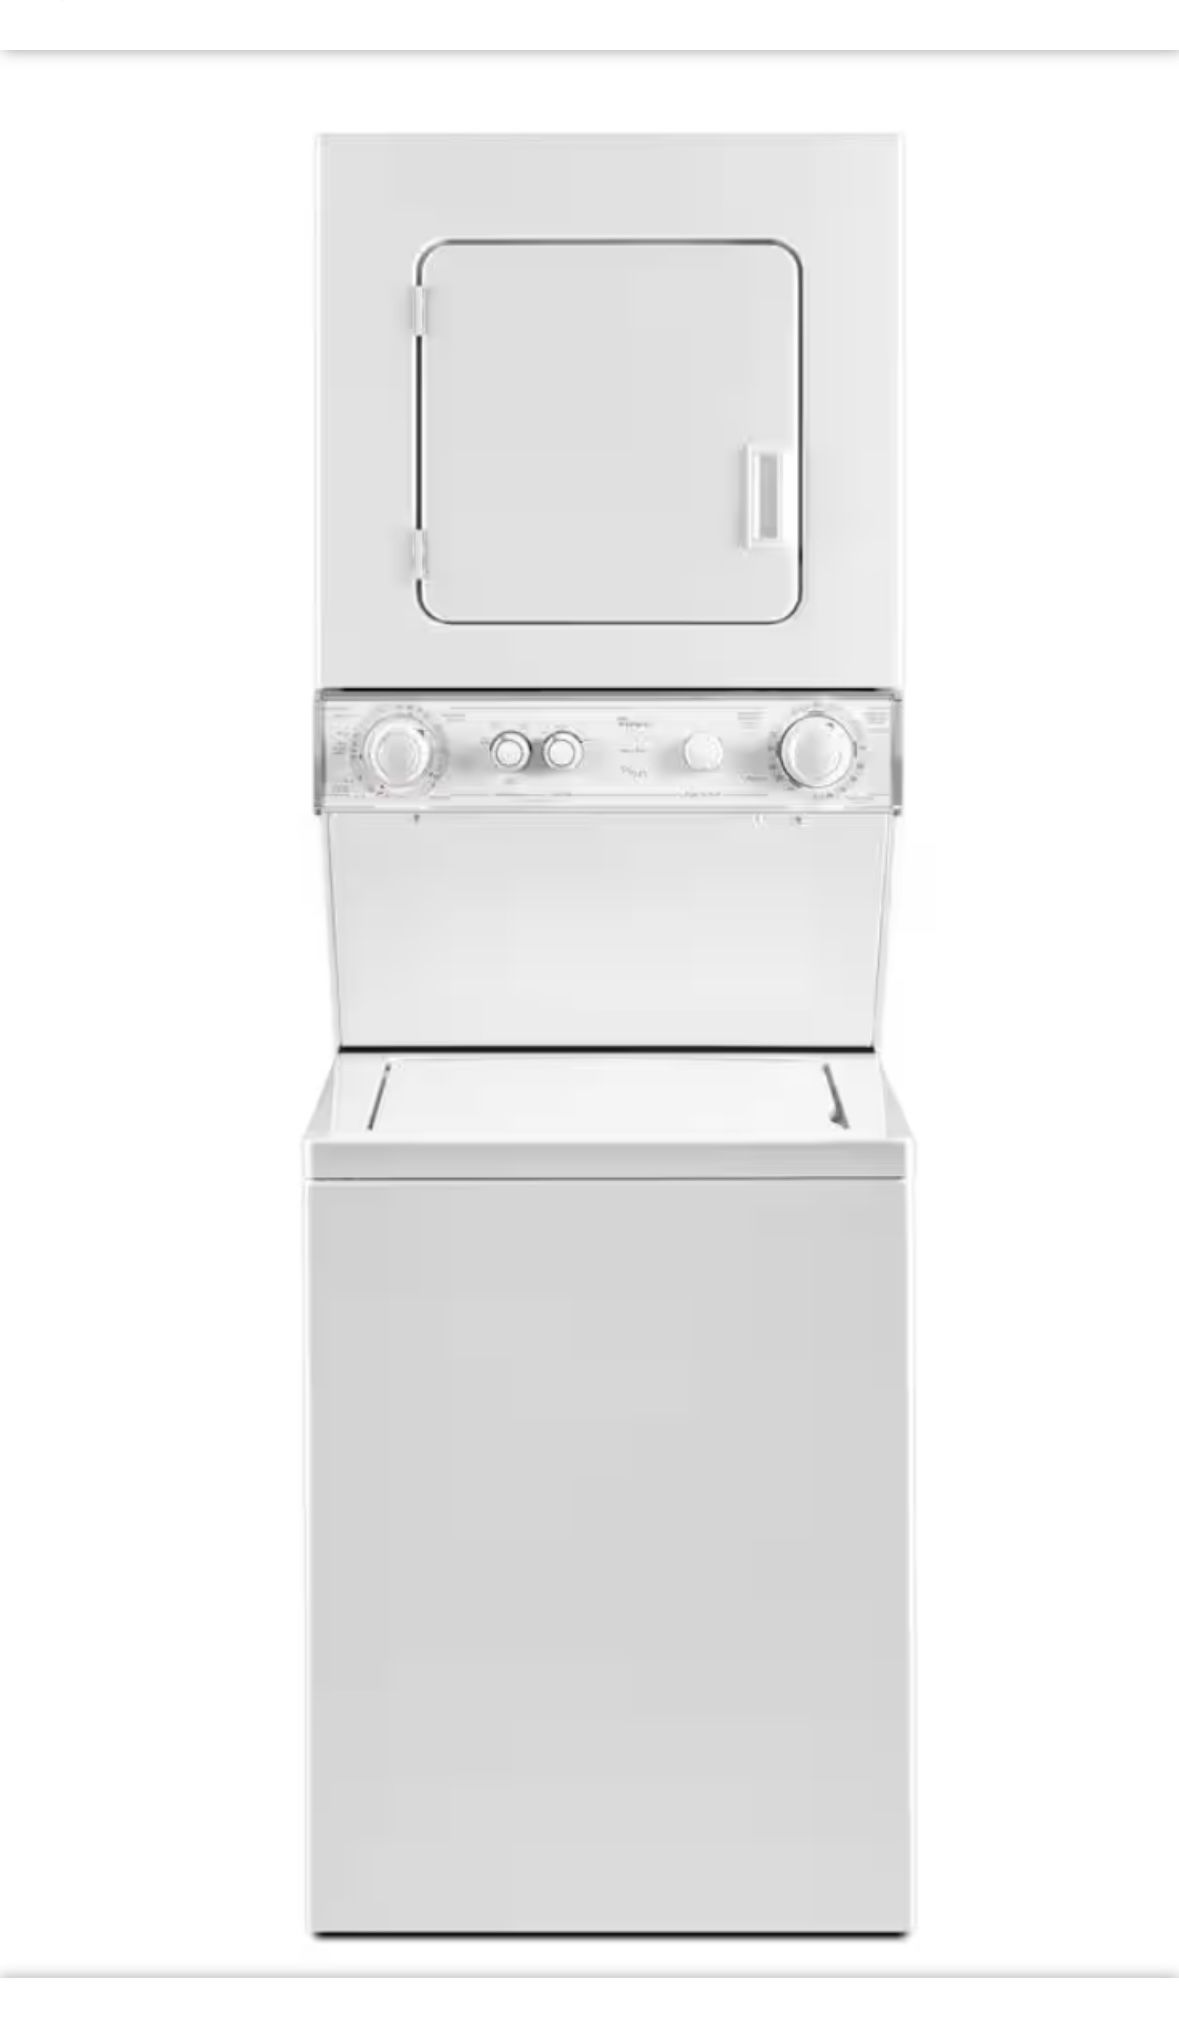 Whirlpool White Thin Twin Laundry Center with 1.5 cu. ft. Washer and 3.4 cu. ft. Electric Vented Dryer